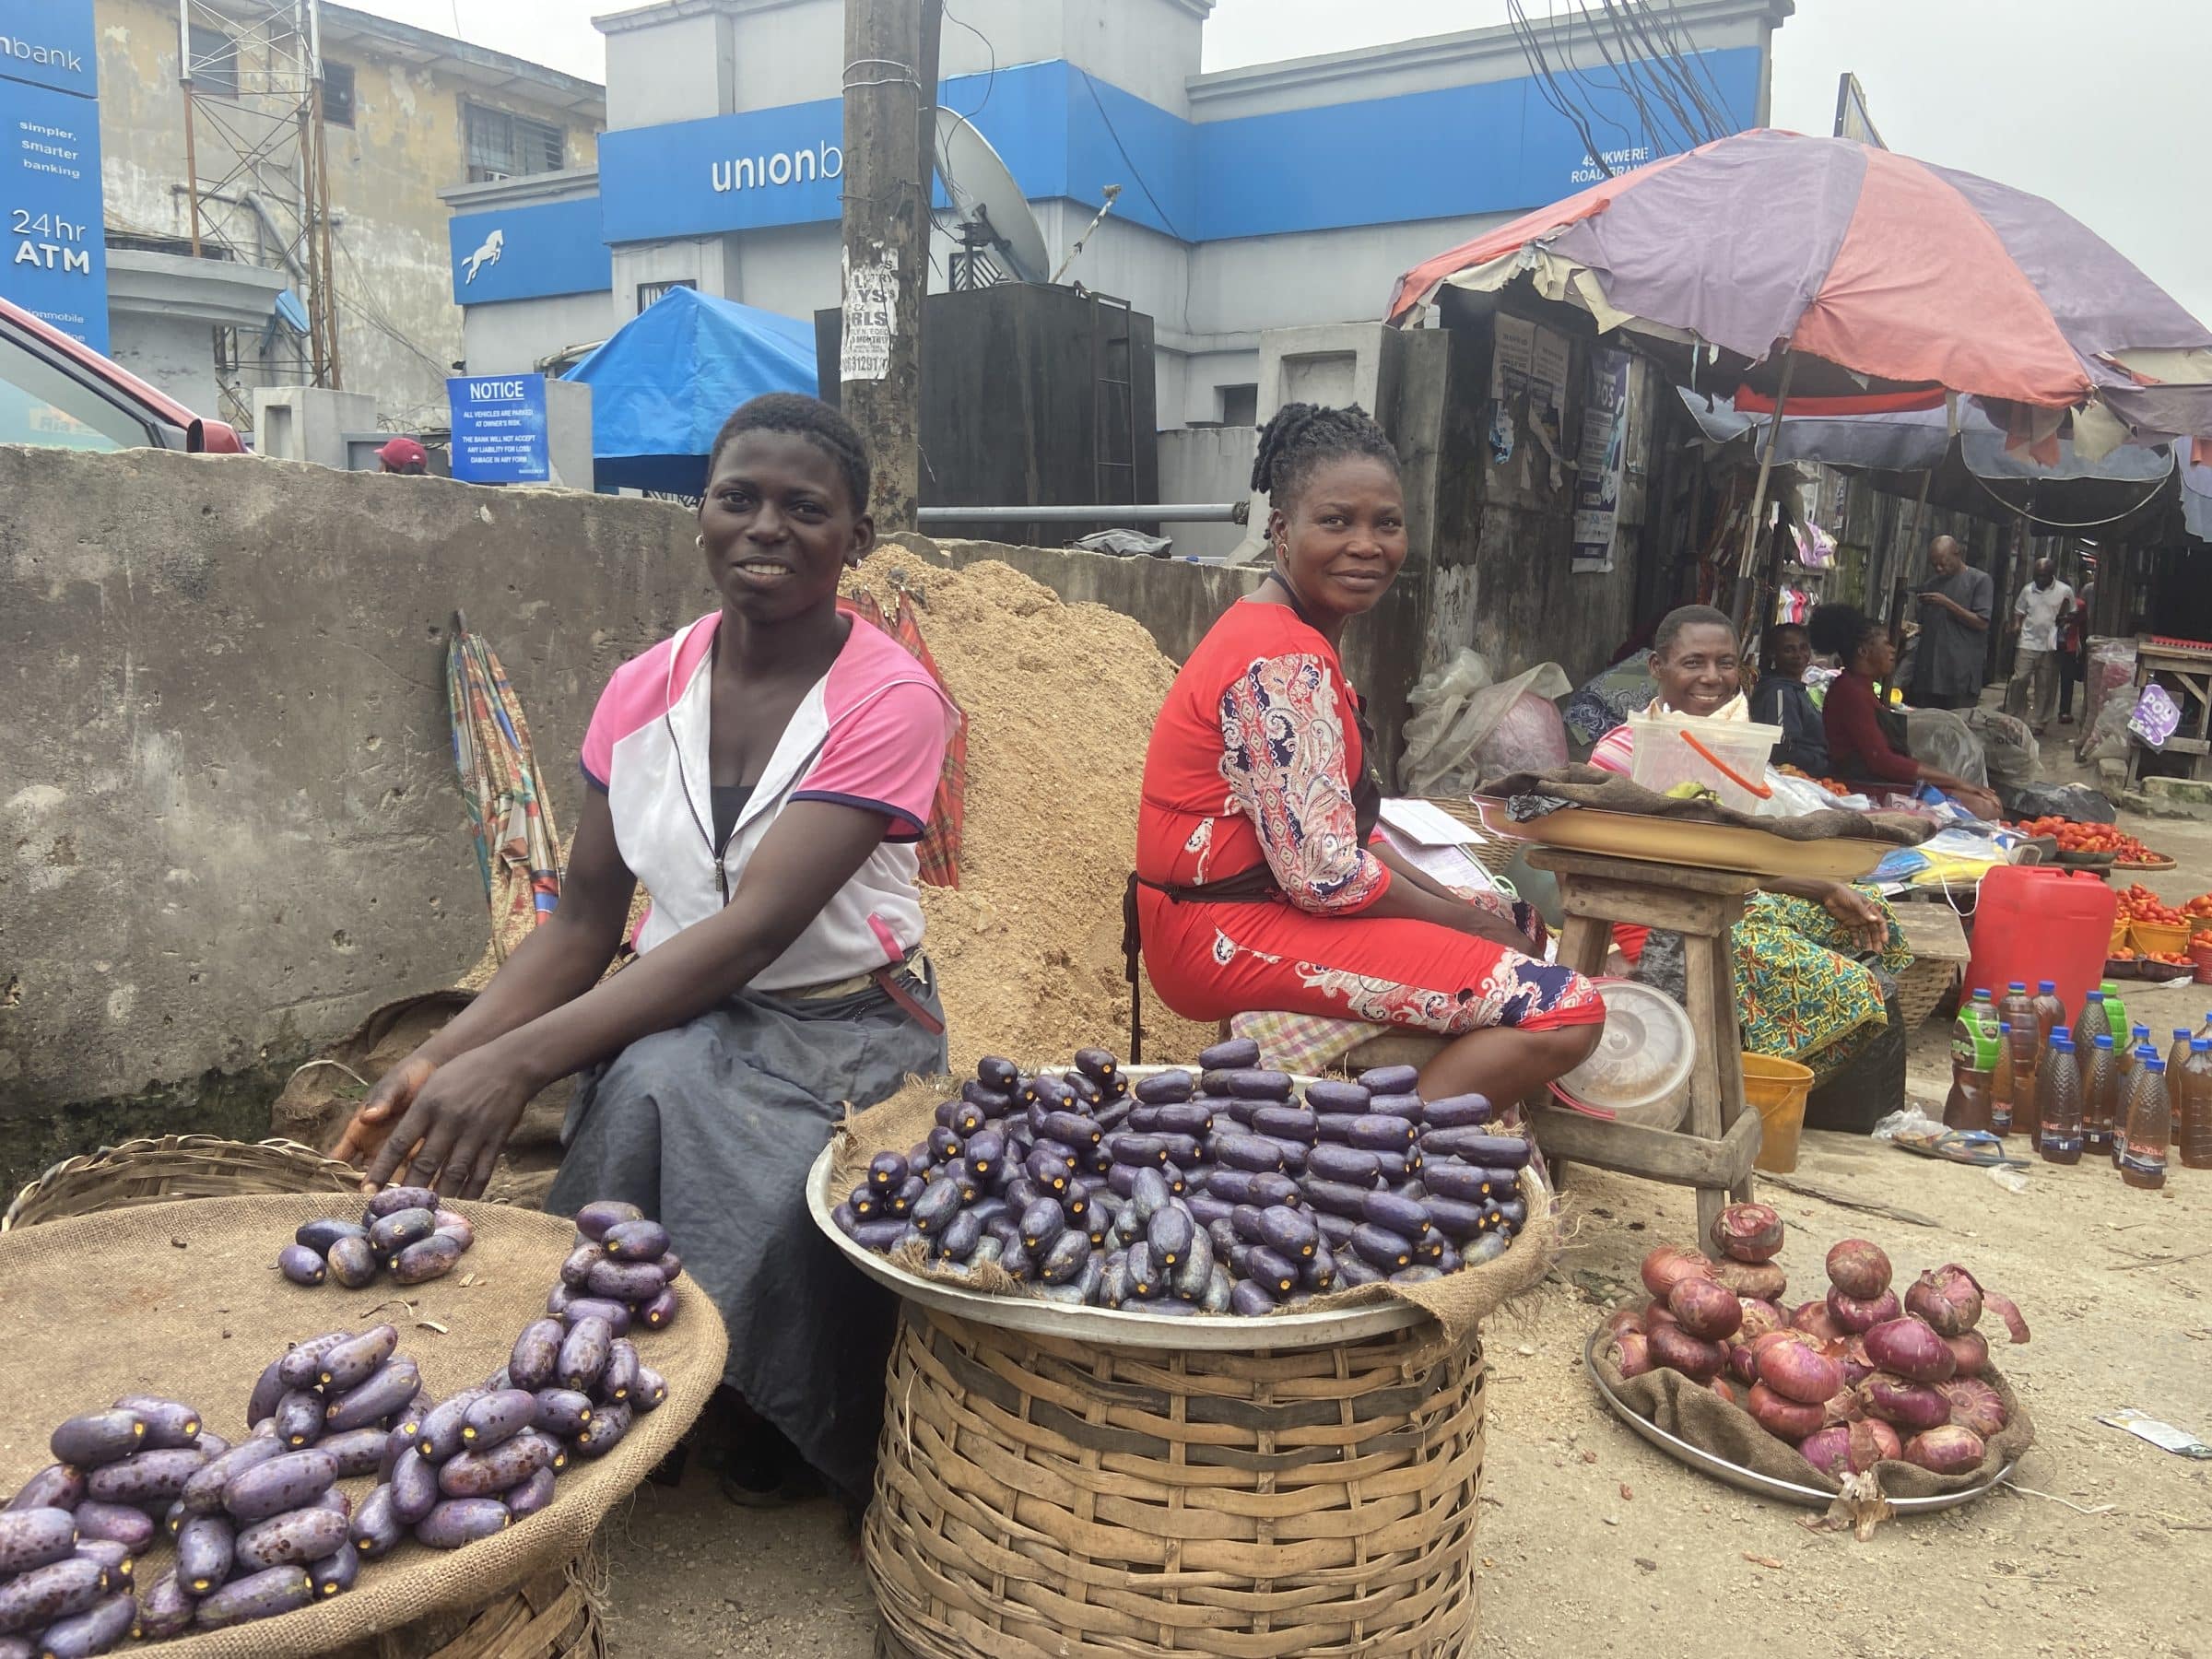 At the market in Port Harcourt